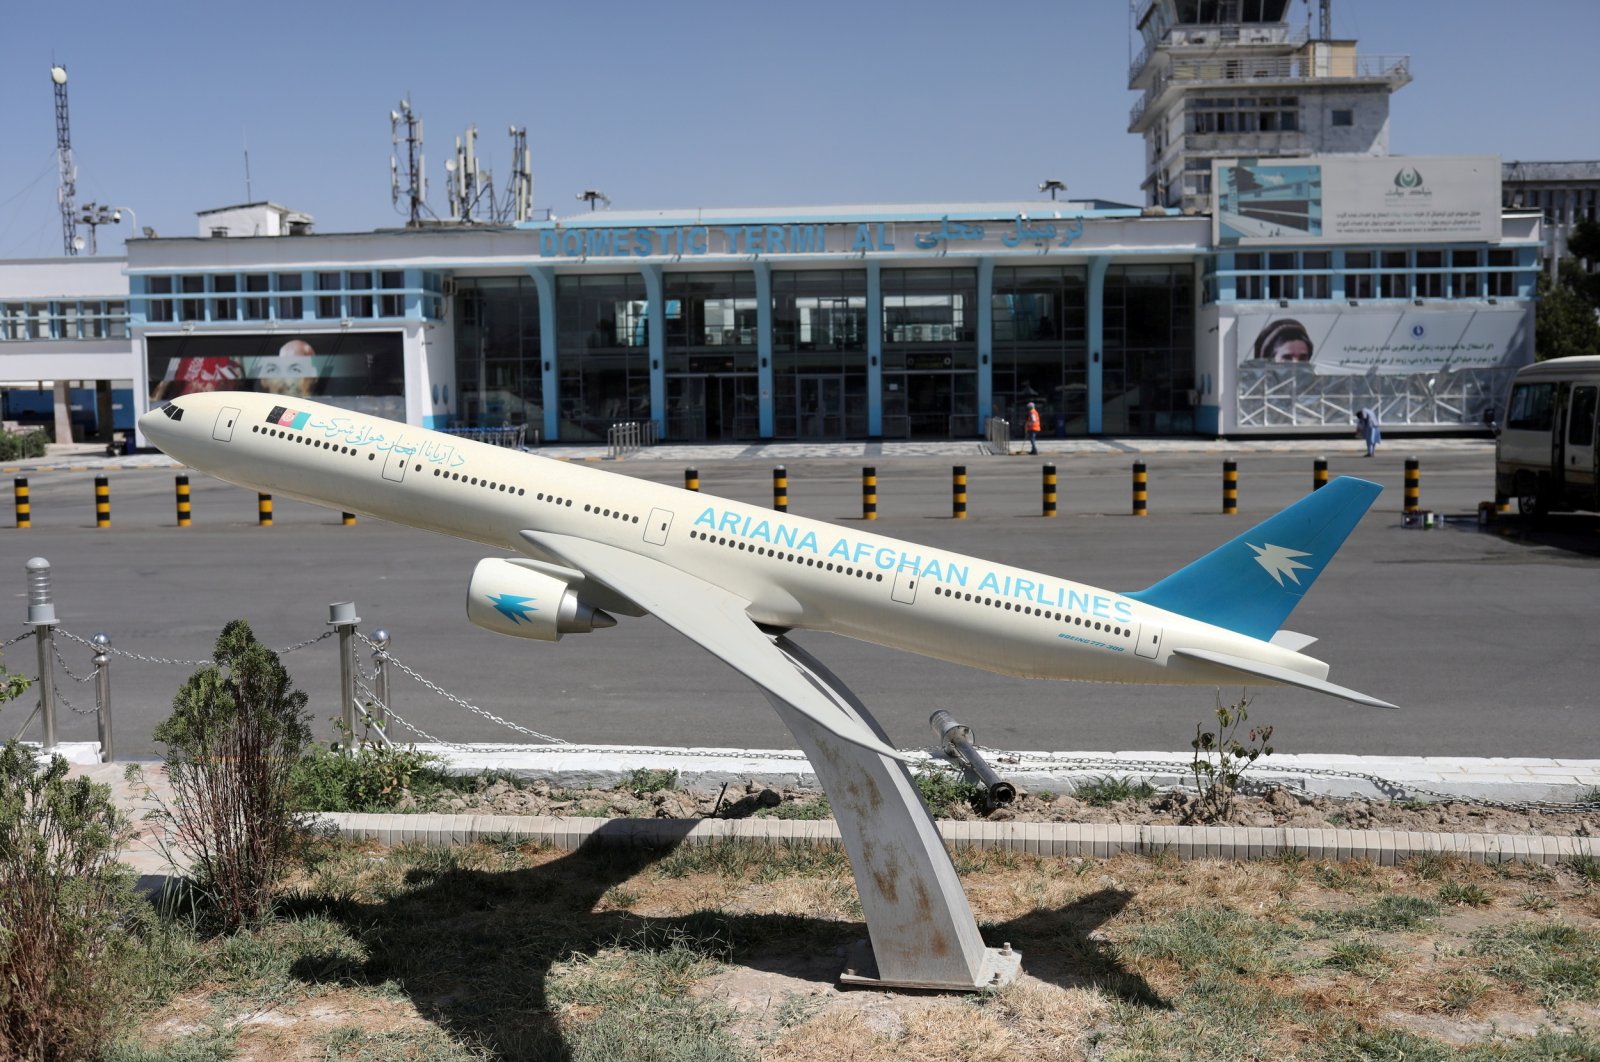 A model of an Ariana Afghan Airlines jet is seen in front of the international airport in Kabul, Afghanistan, September 5, 2021. (REUTERS Photo)